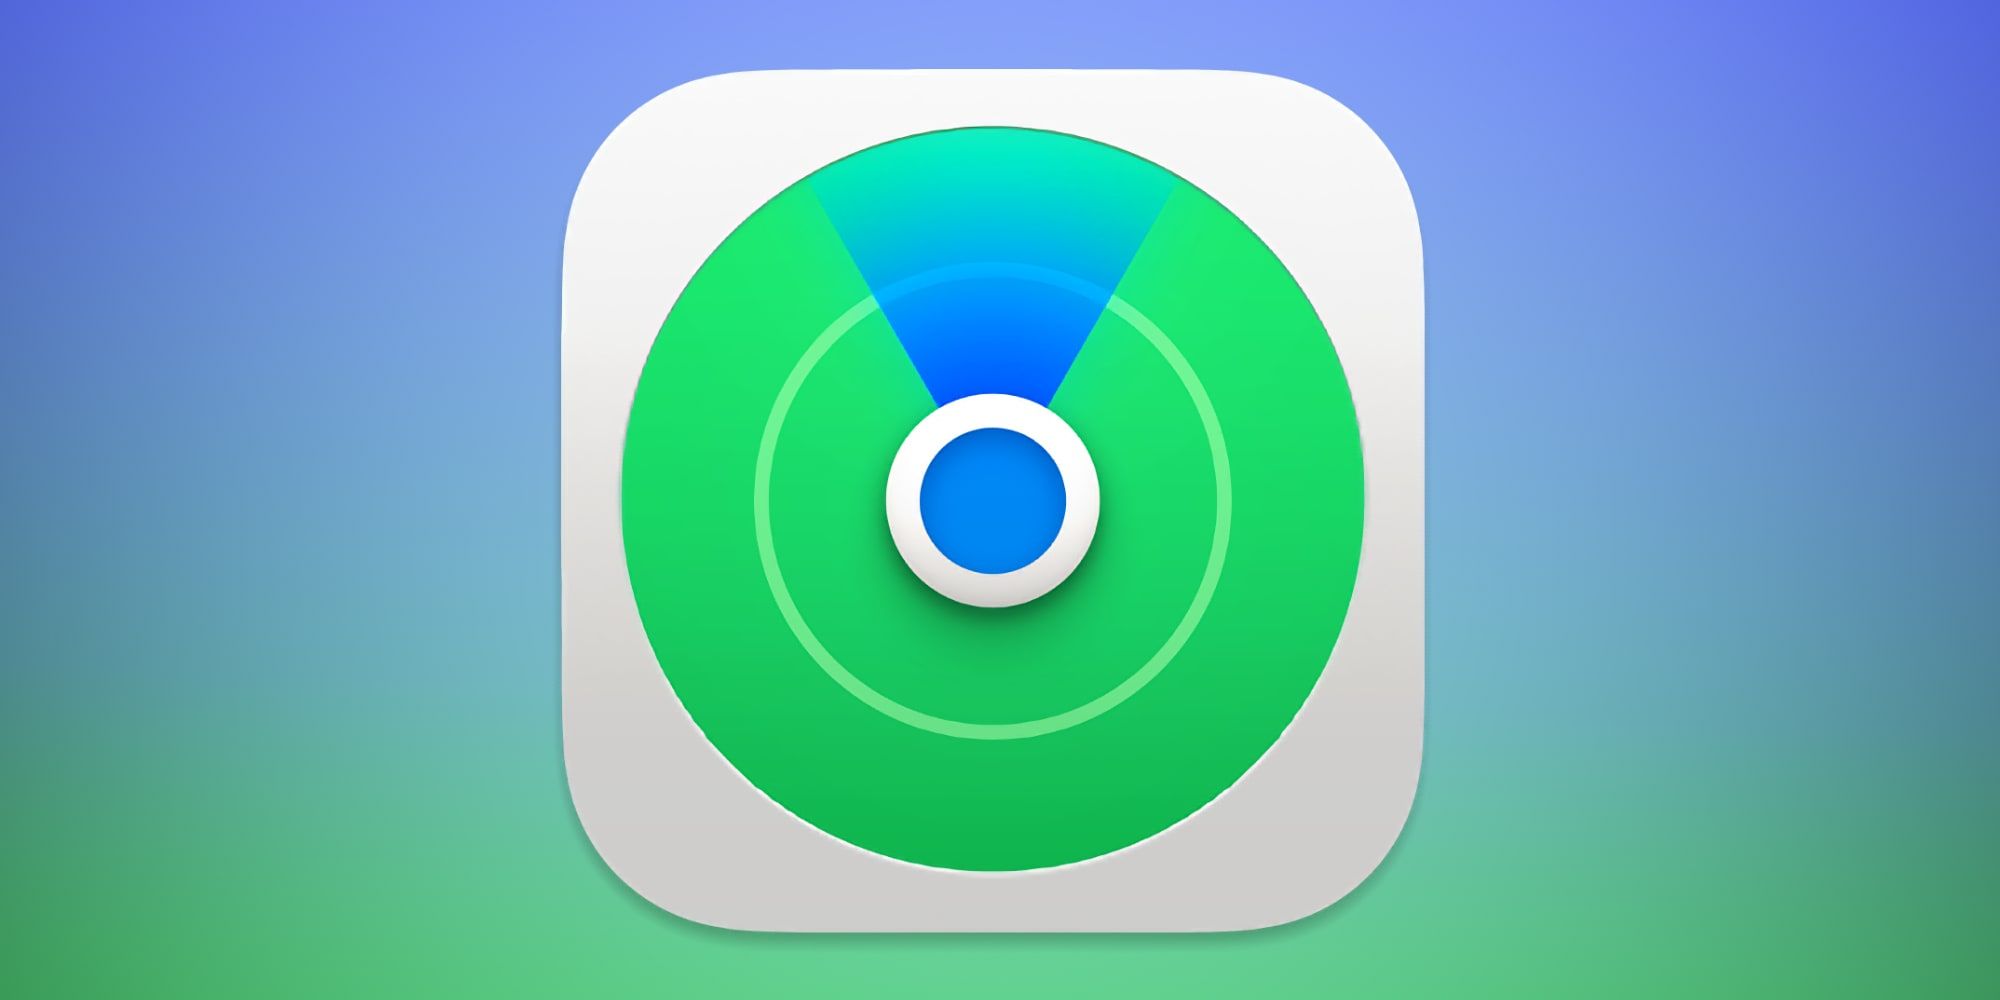 Apple FindMy App icon on a blue and green background